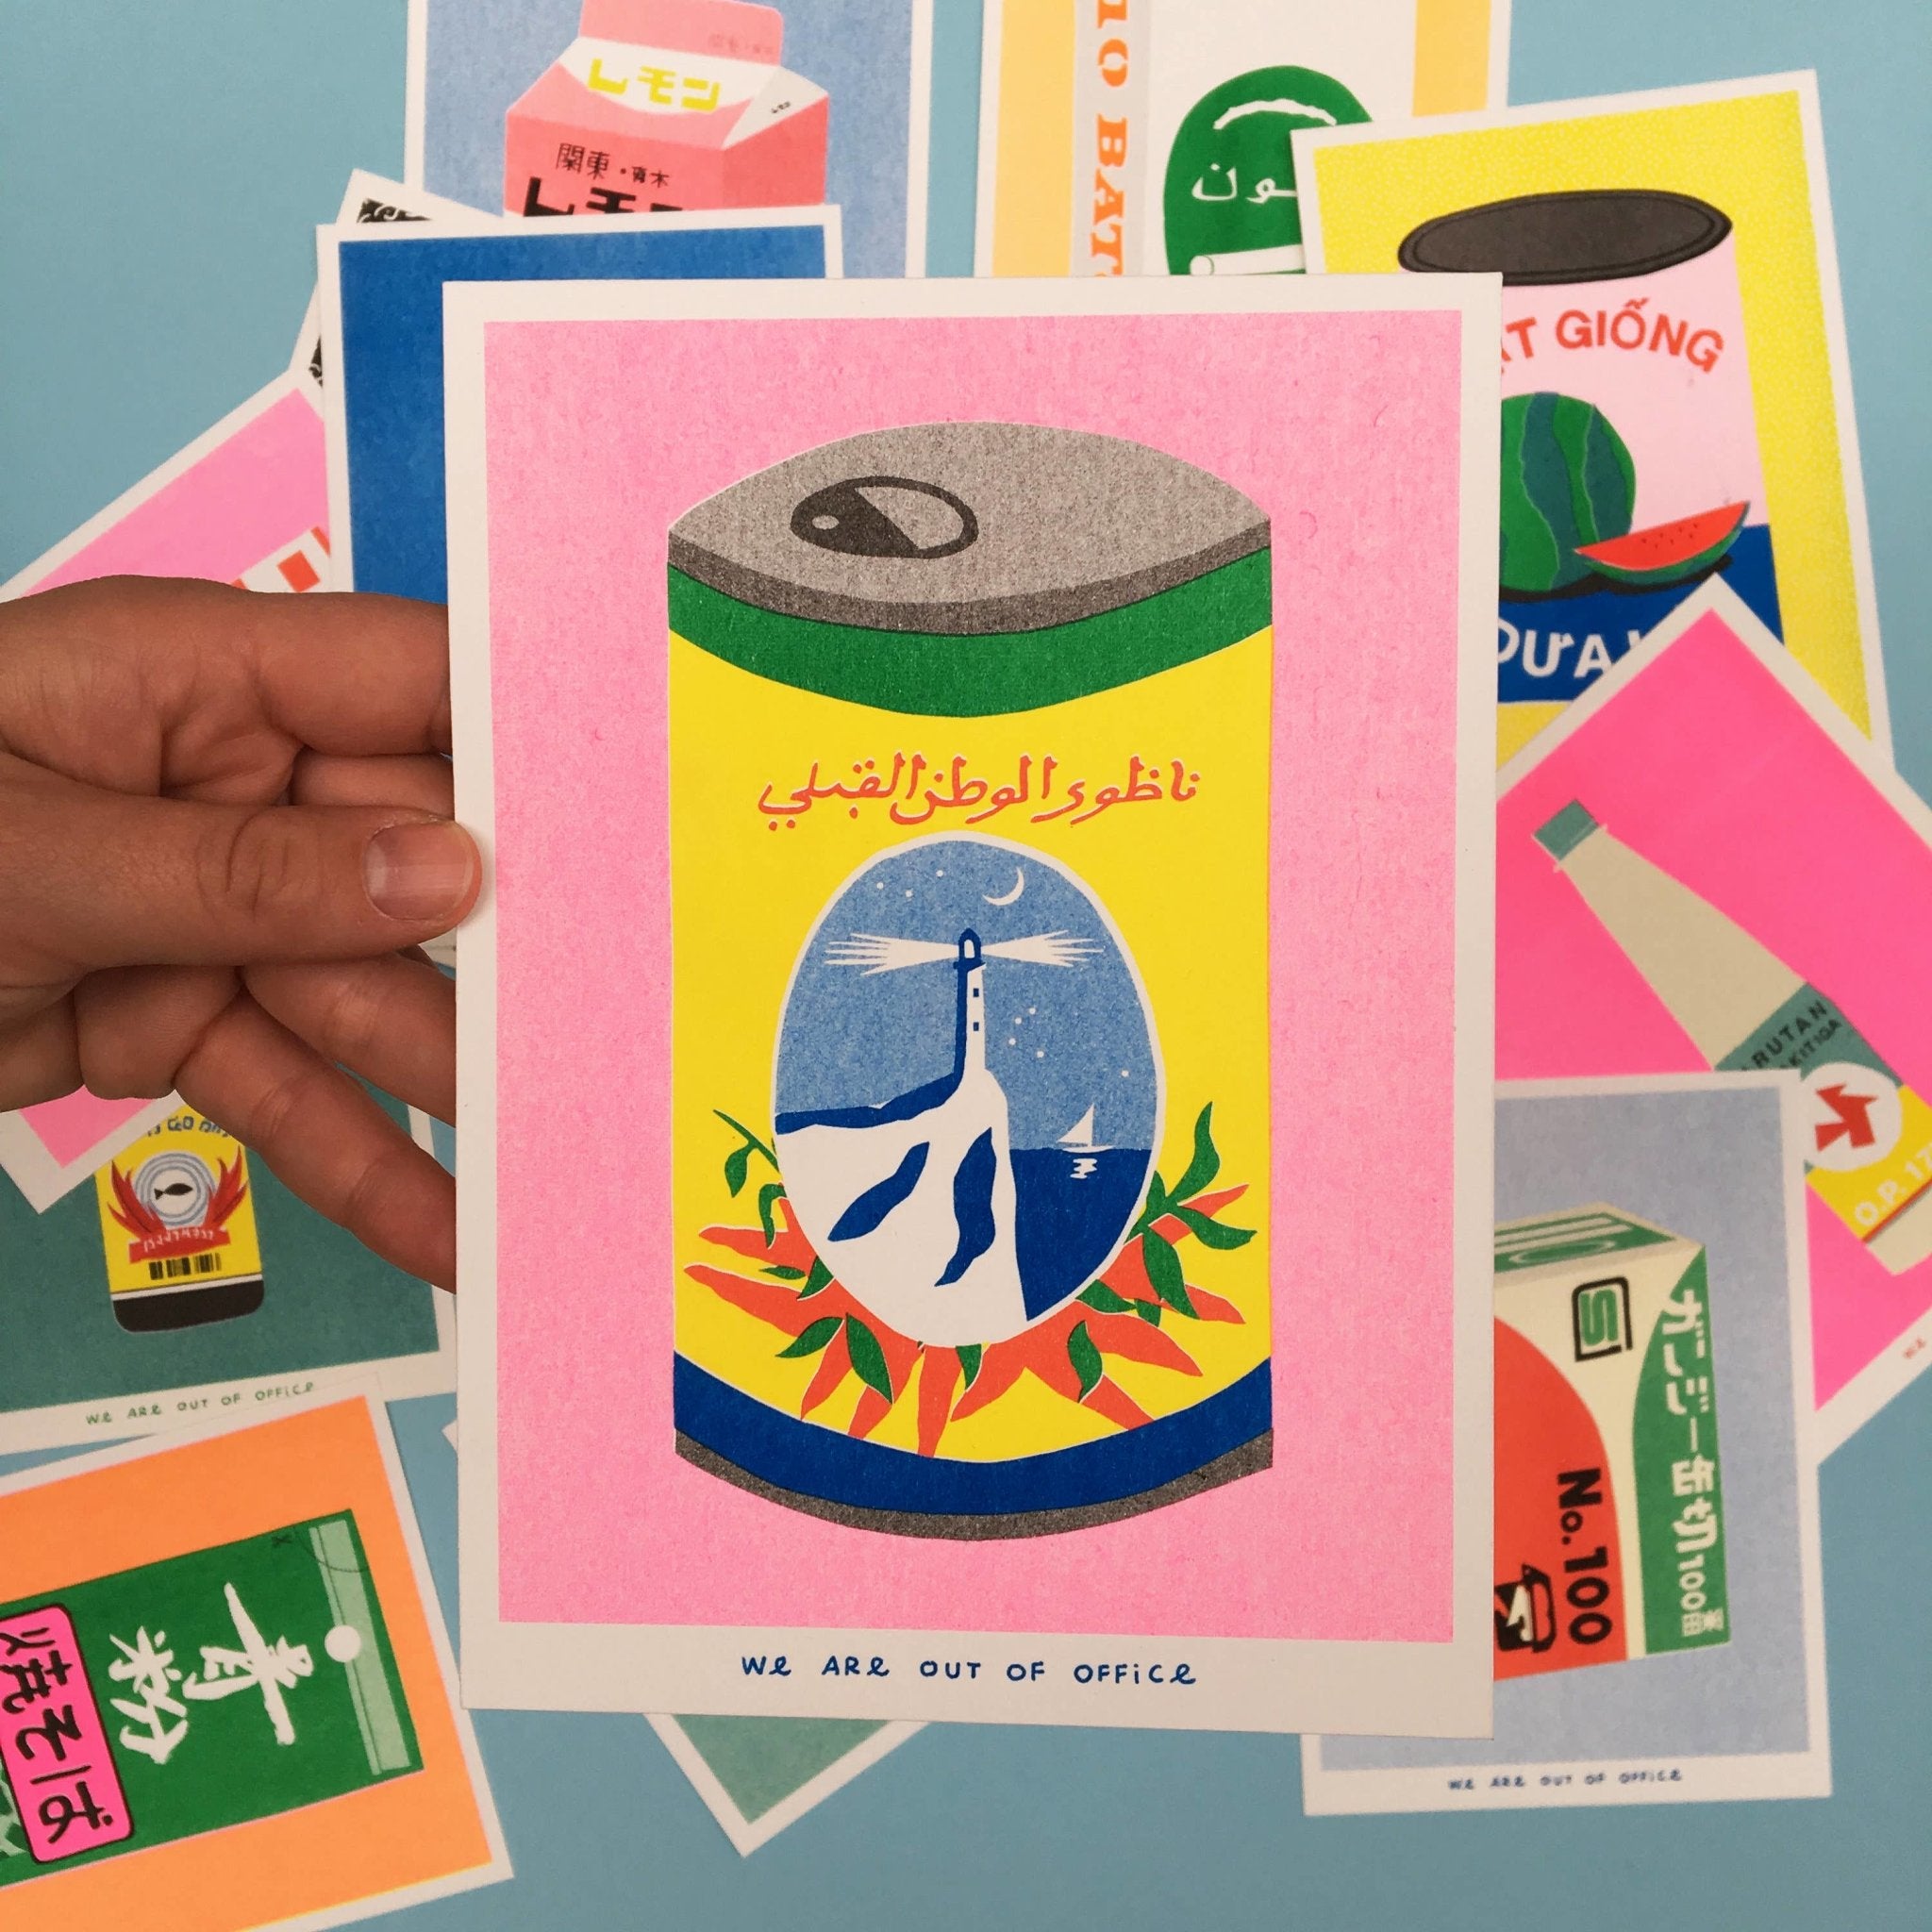 We are out of office - A risograph print of a can harissa - Ensemble Studios